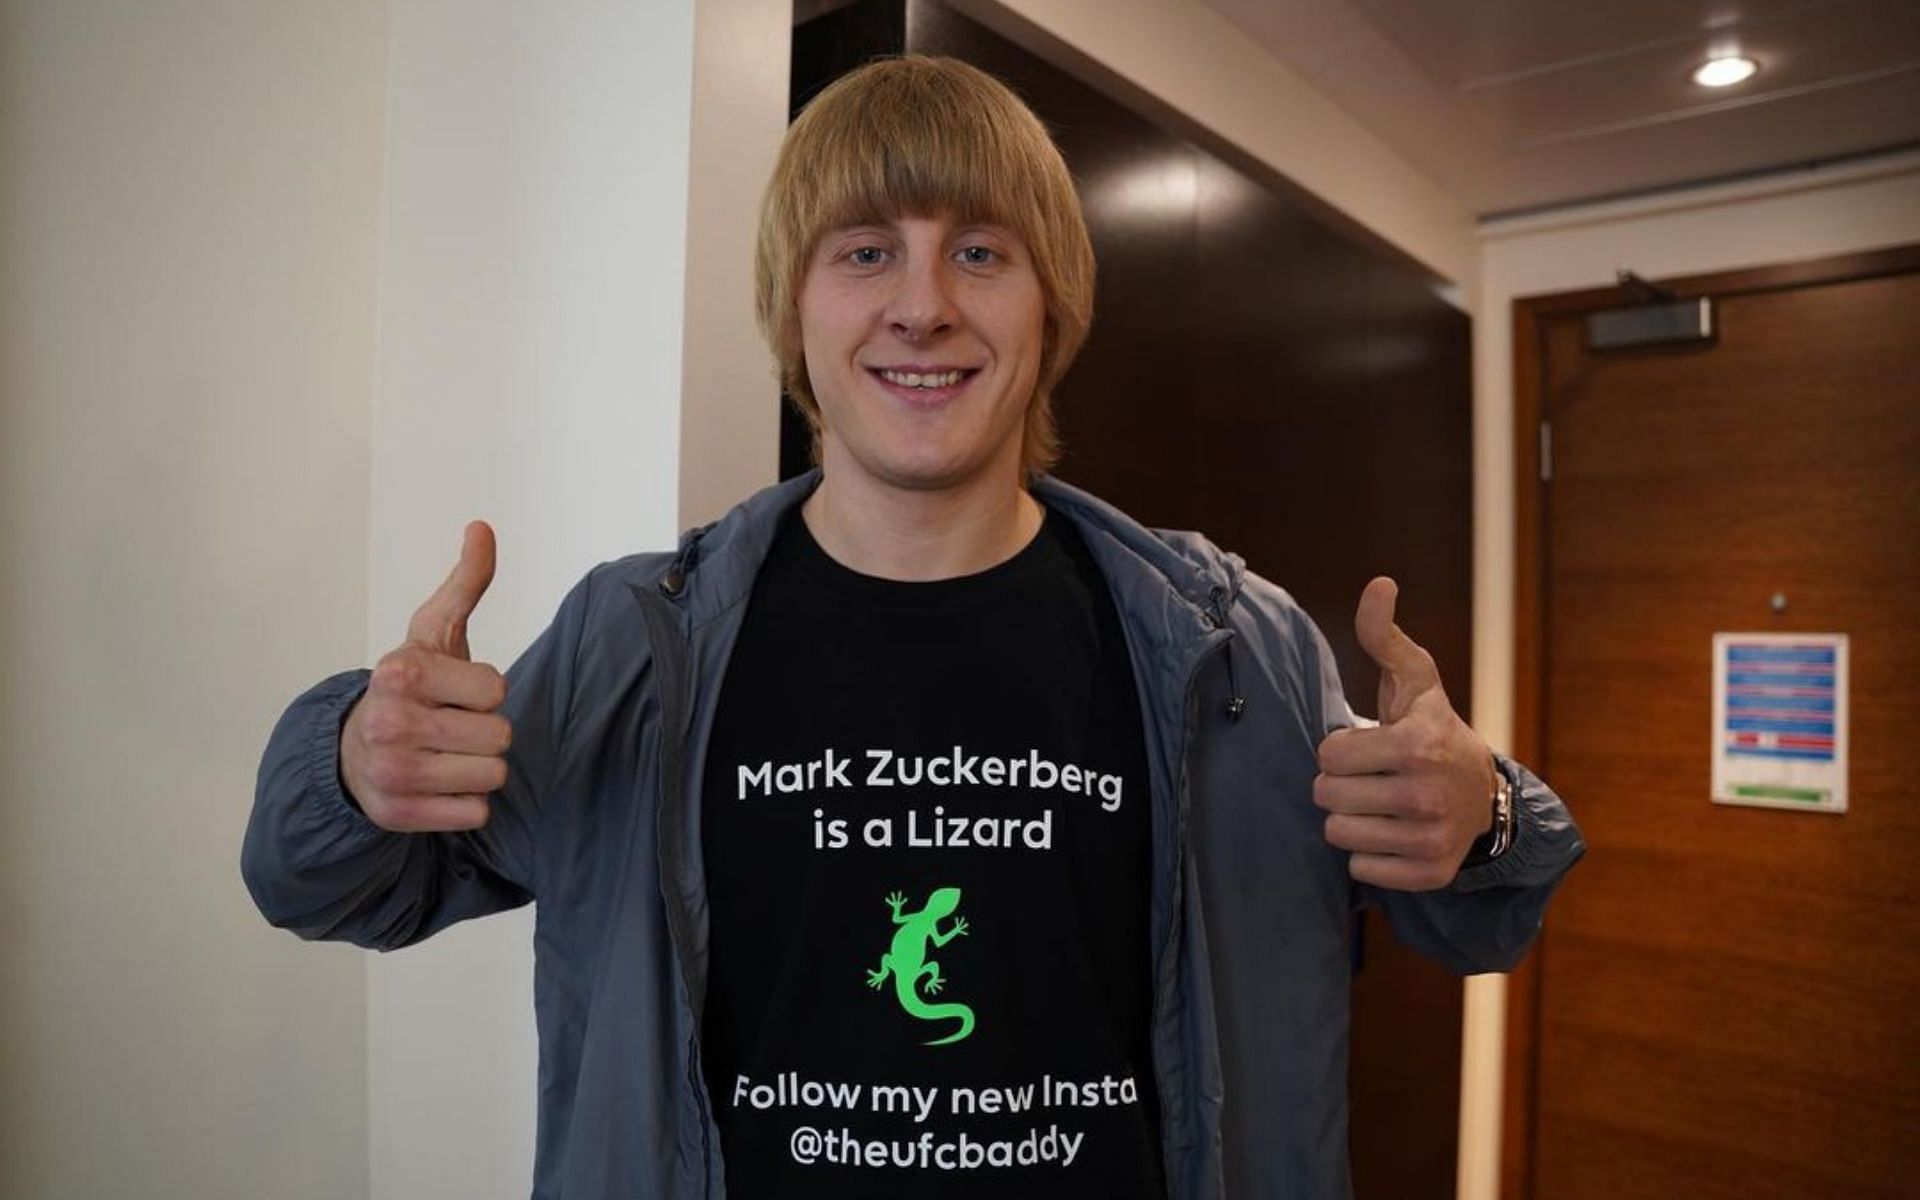 Paddy Pimblett has lashed out at Instagram owner Mark Zuckerberg [Image courtesy: @theufcbaddy on Instagram]